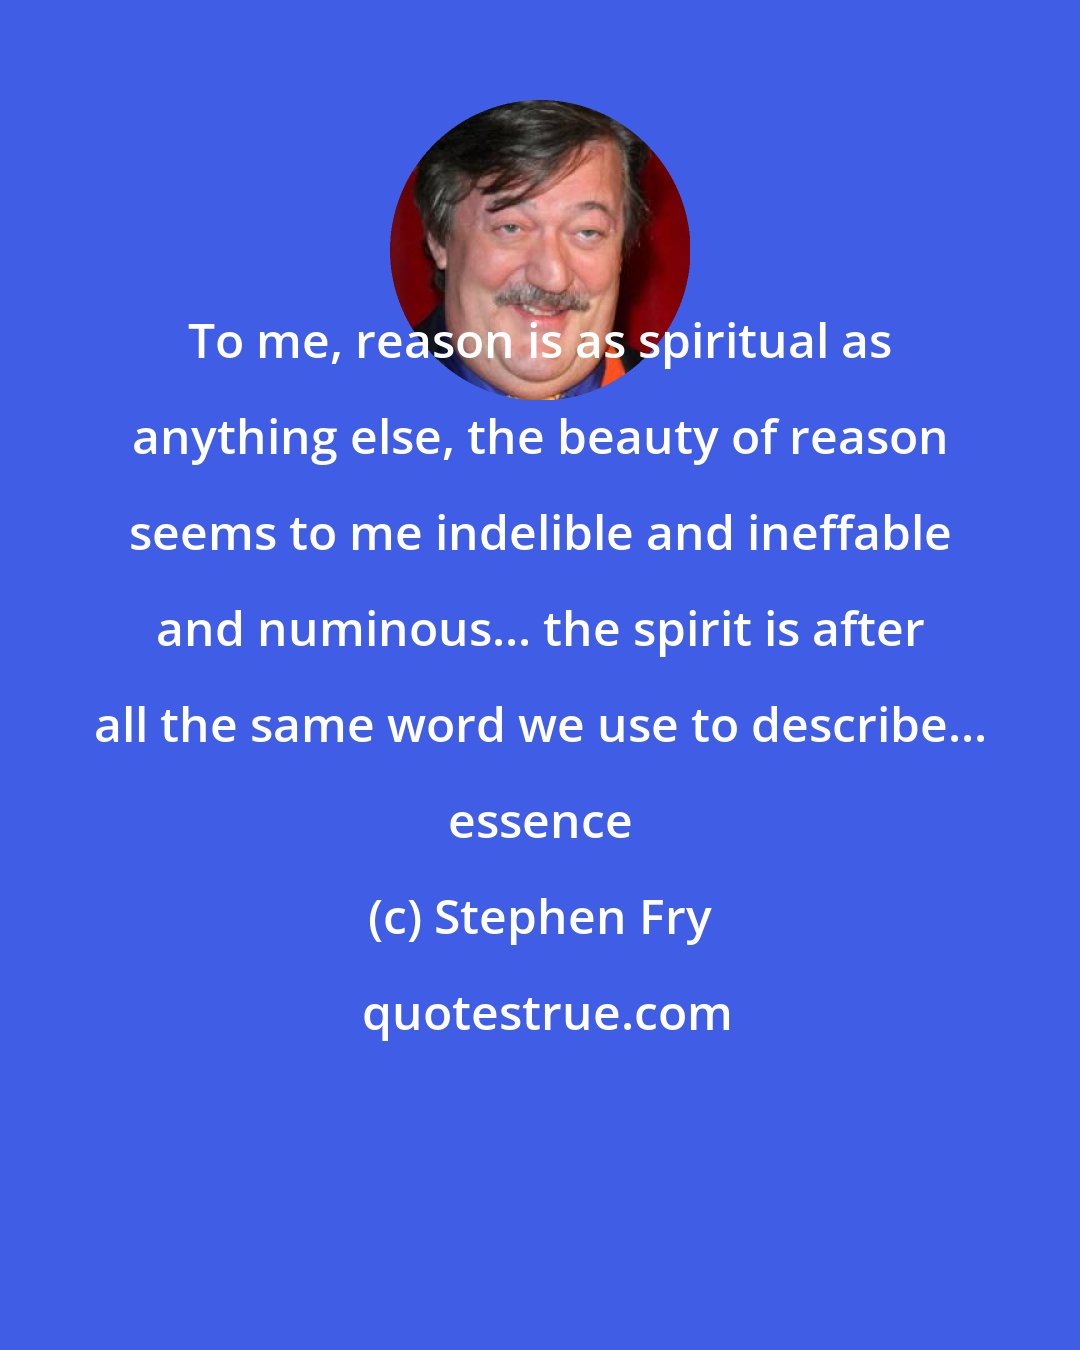 Stephen Fry: To me, reason is as spiritual as anything else, the beauty of reason seems to me indelible and ineffable and numinous... the spirit is after all the same word we use to describe... essence